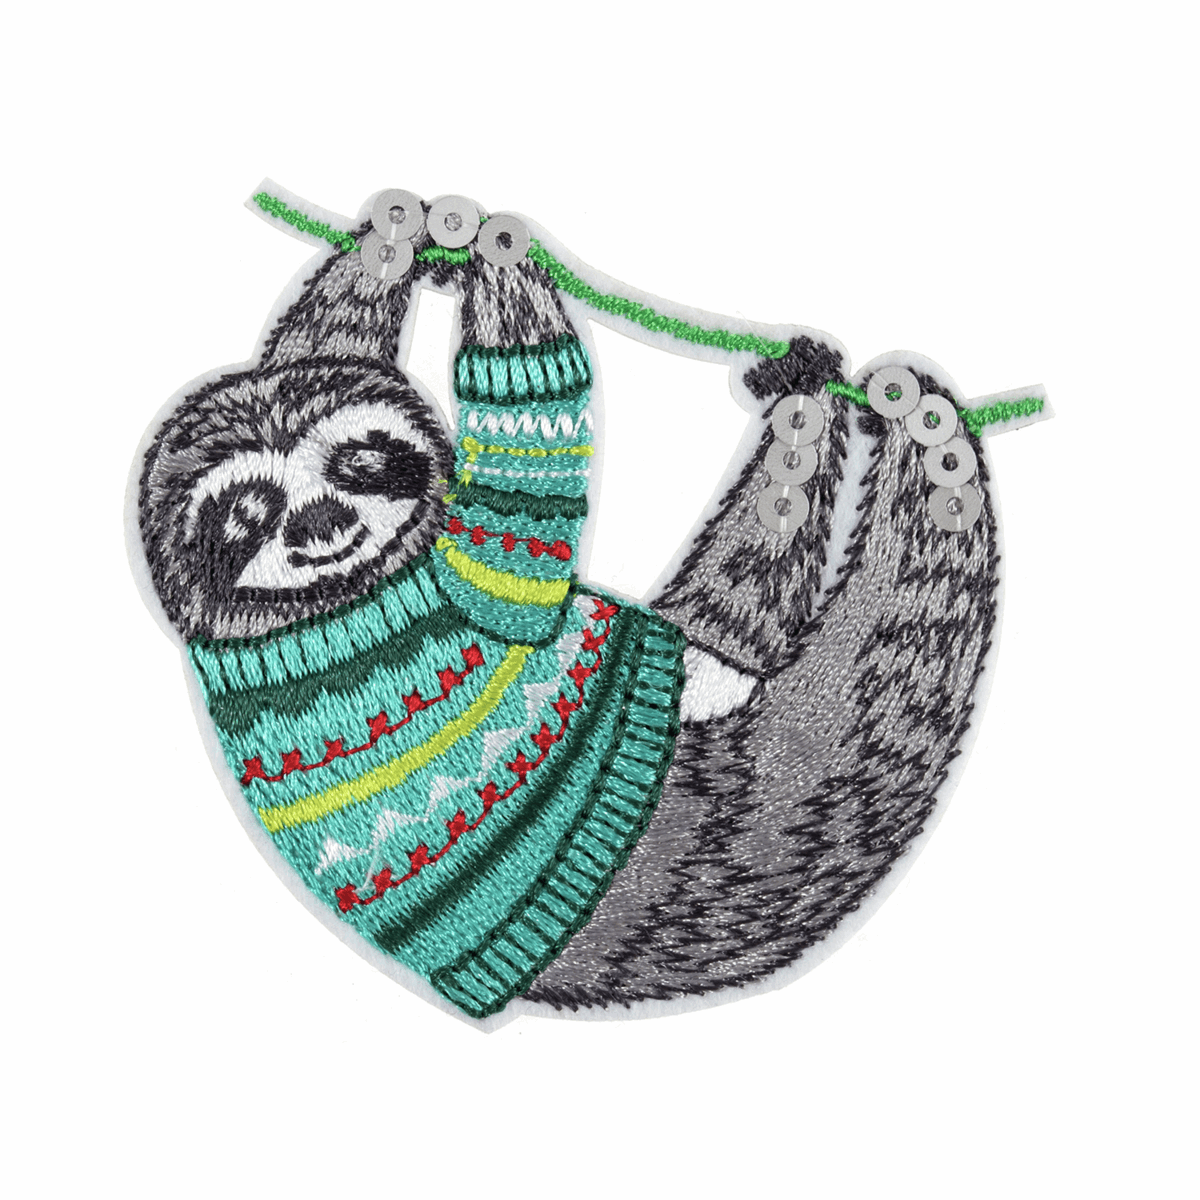 Iron-On/Sew On Motif Patch - Sloth